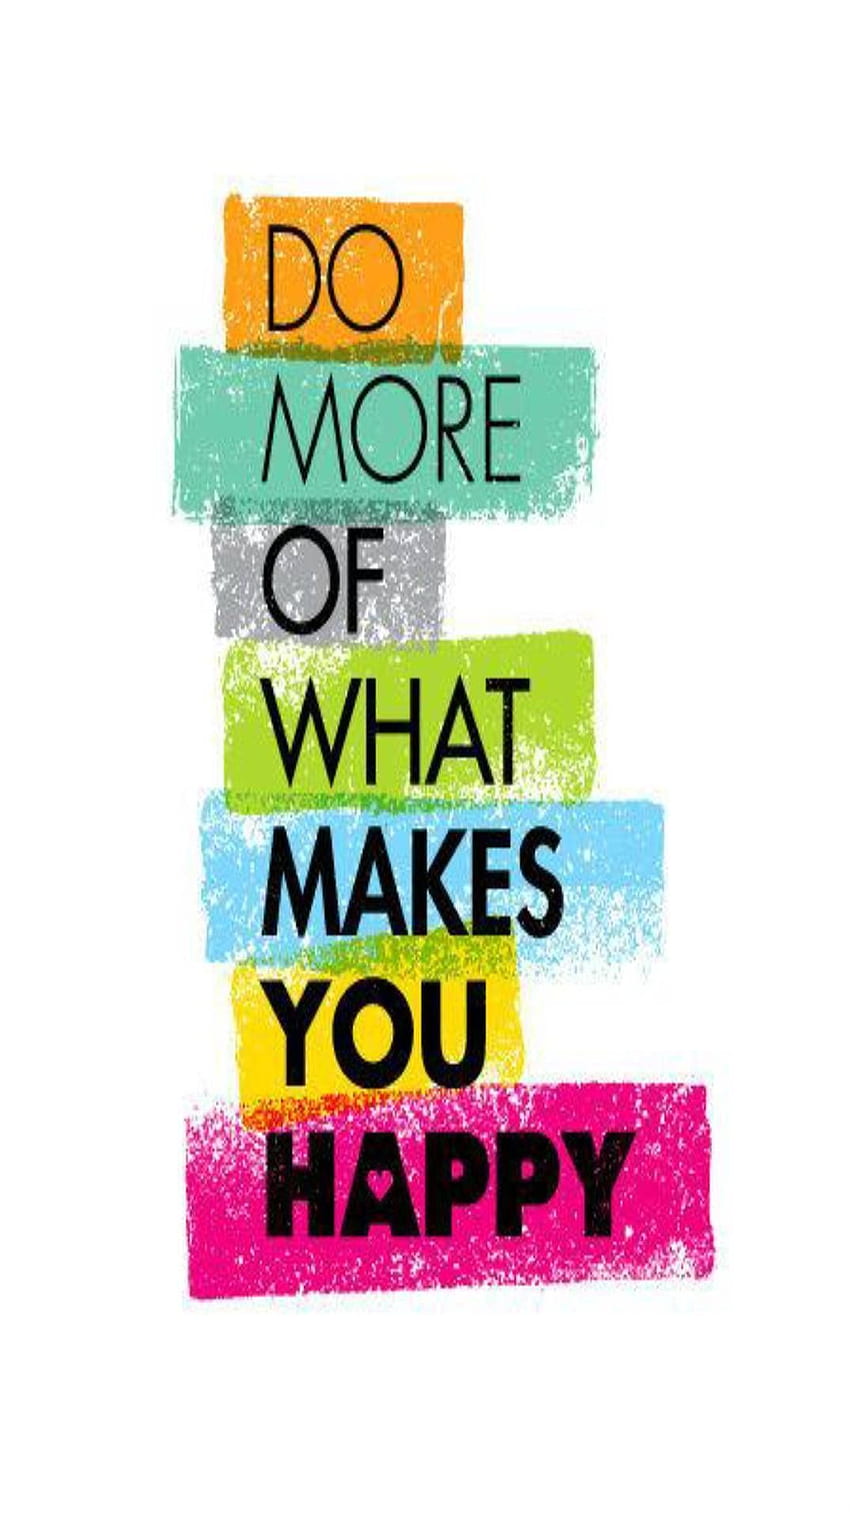 Micromax, Do More of What Makes You Happy HD phone wallpaper